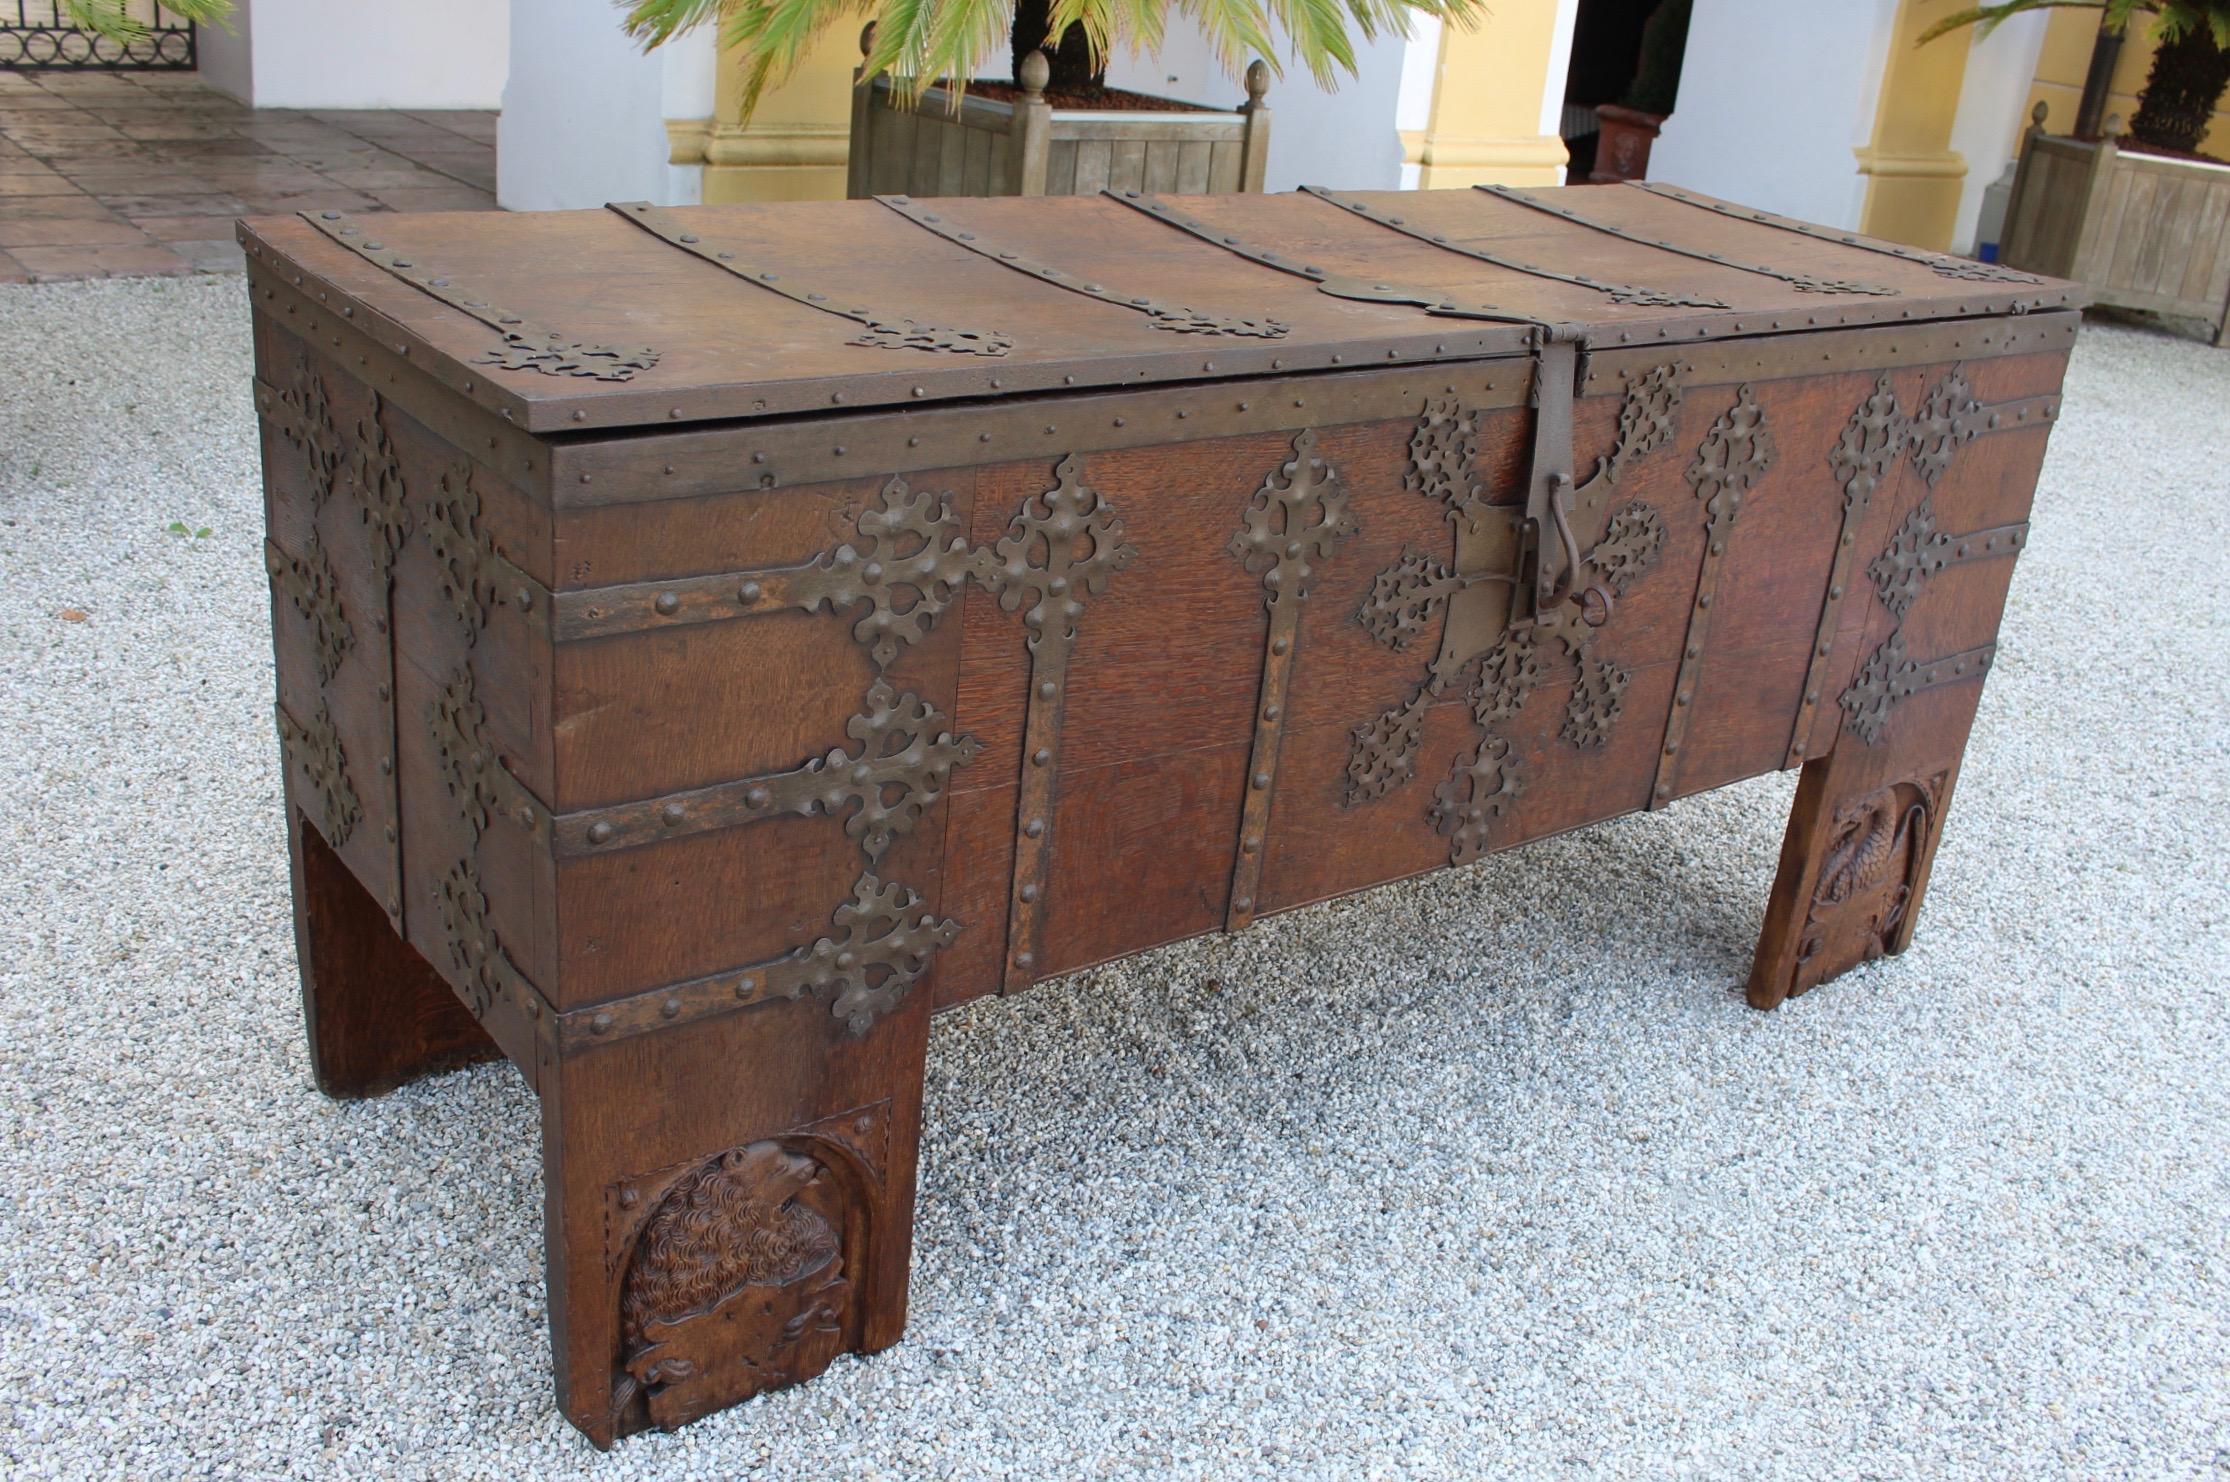 Rare Late Medieval 16th Century German Wrought Iron Oak Chest or Stollentruhe For Sale 4